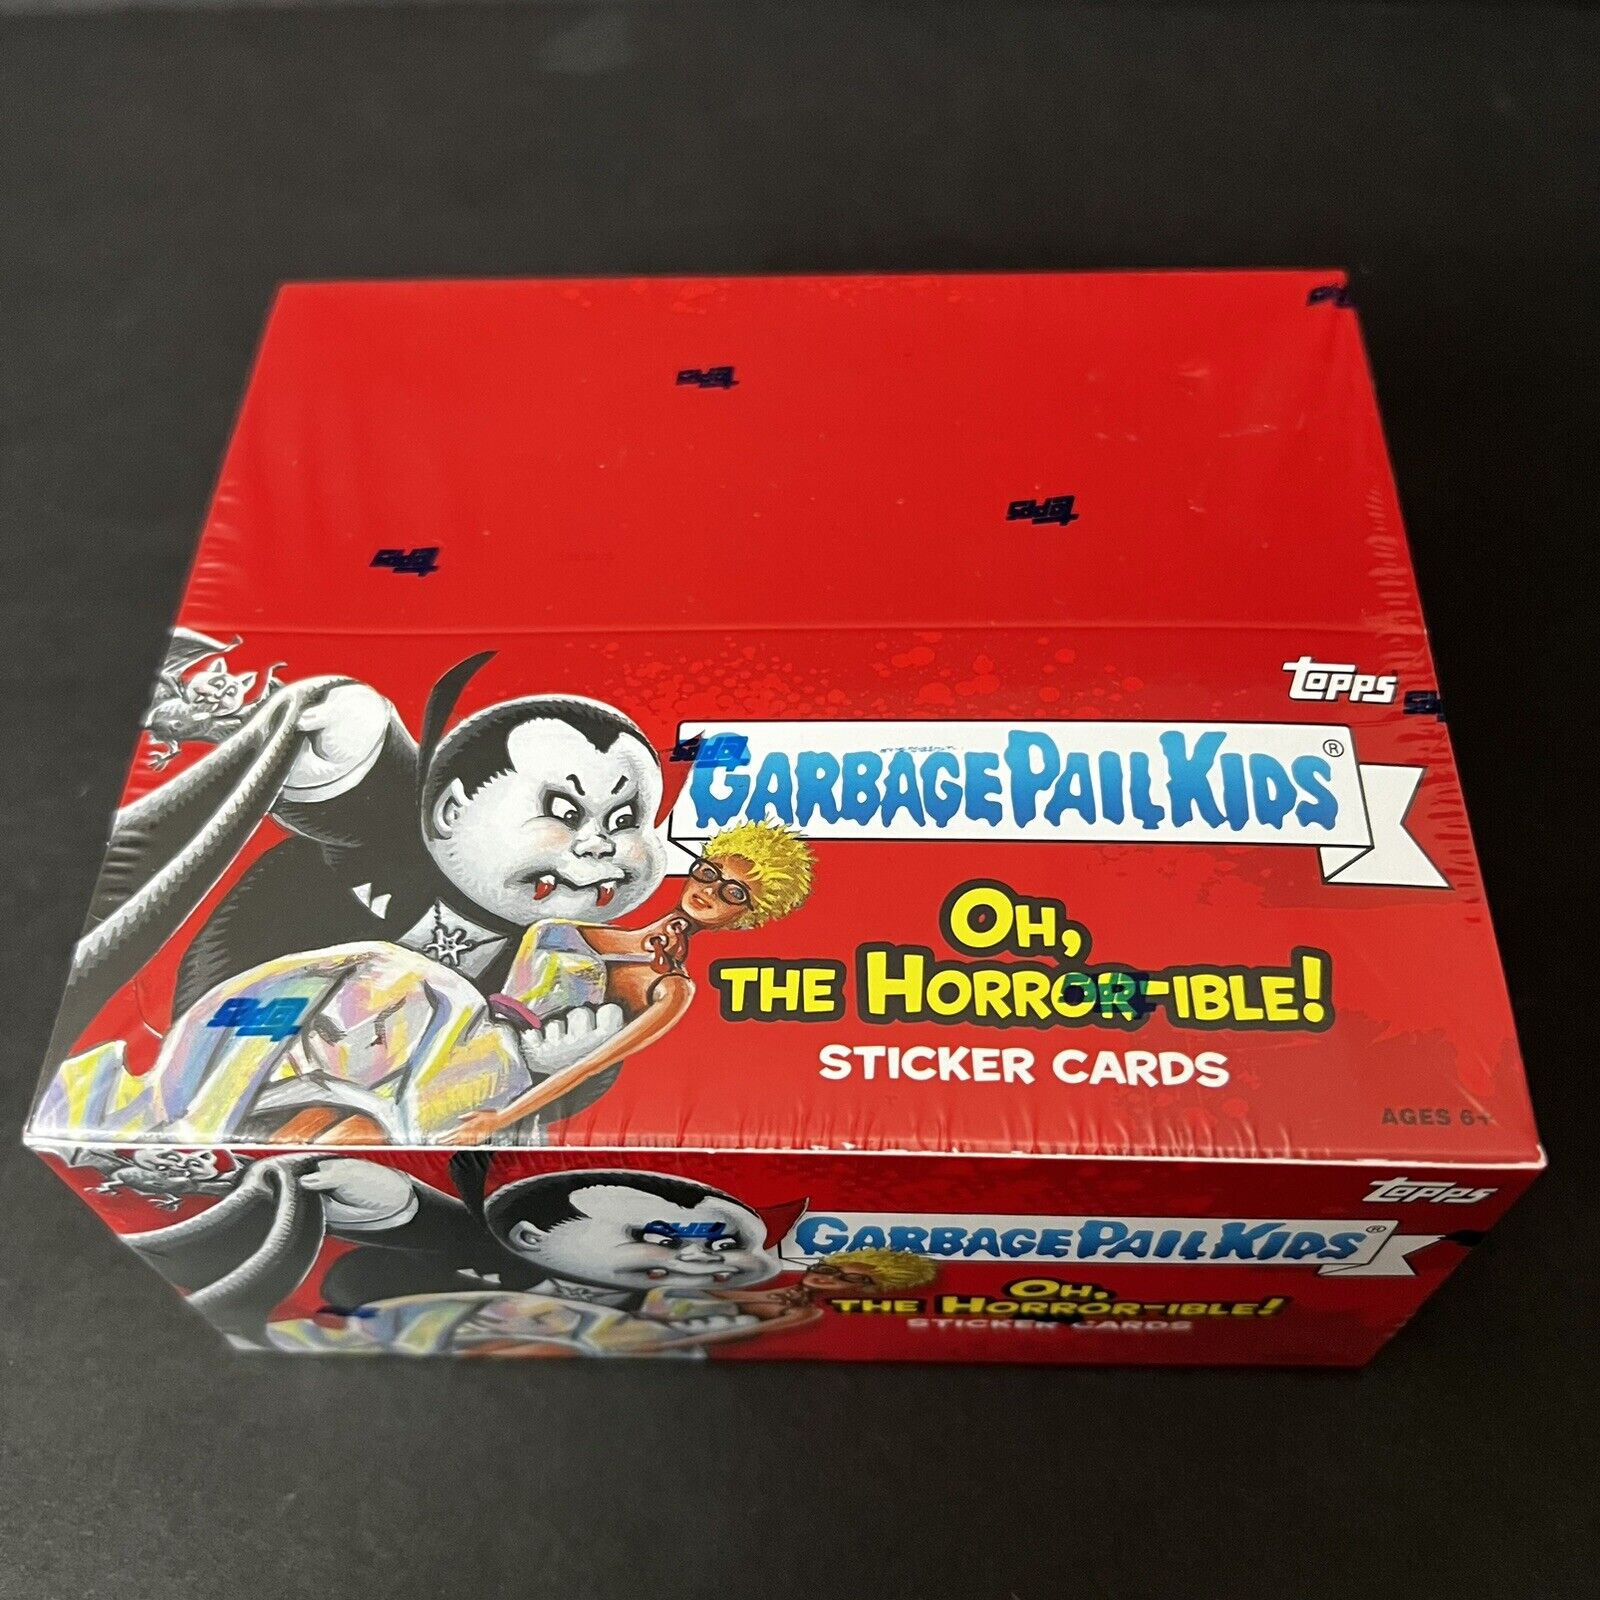 2018 Garbage Pail Kids GPK Oh, The Horror-ible Box Factory Sealed 24 Packs